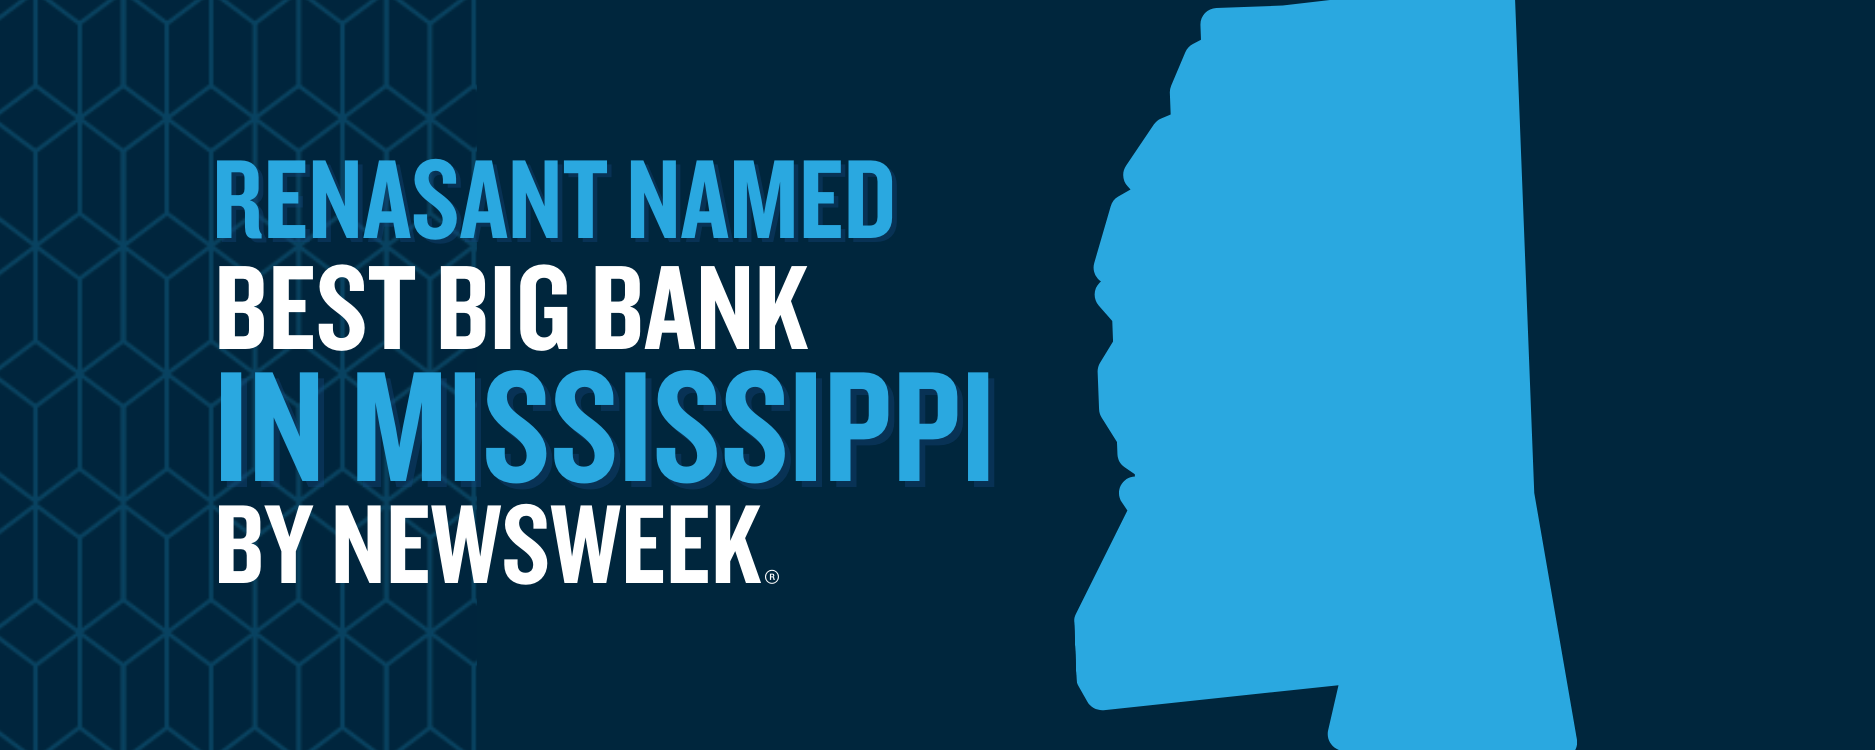 Renasant Named Best Big Bank in Mississippi for 2022 by Newsweek